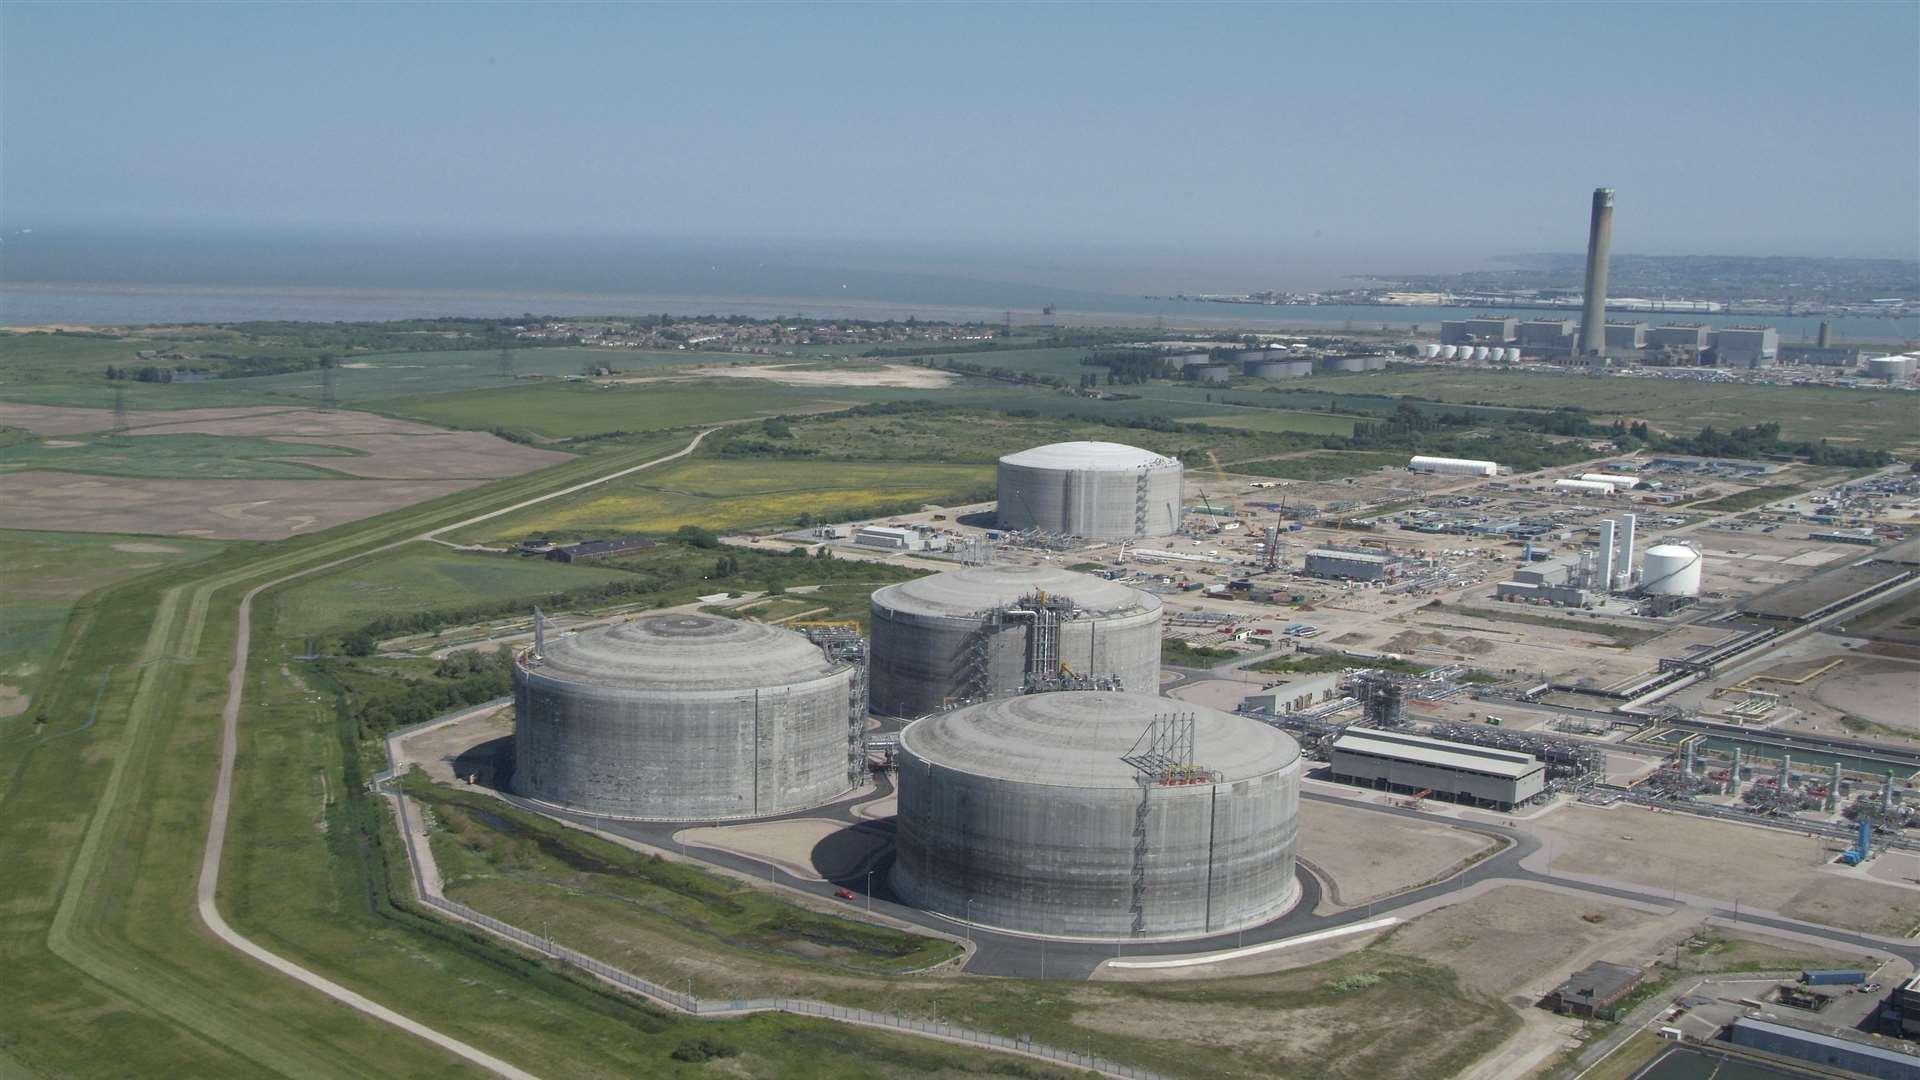 The National Grid LNG importation terminal at the Isle of Grain